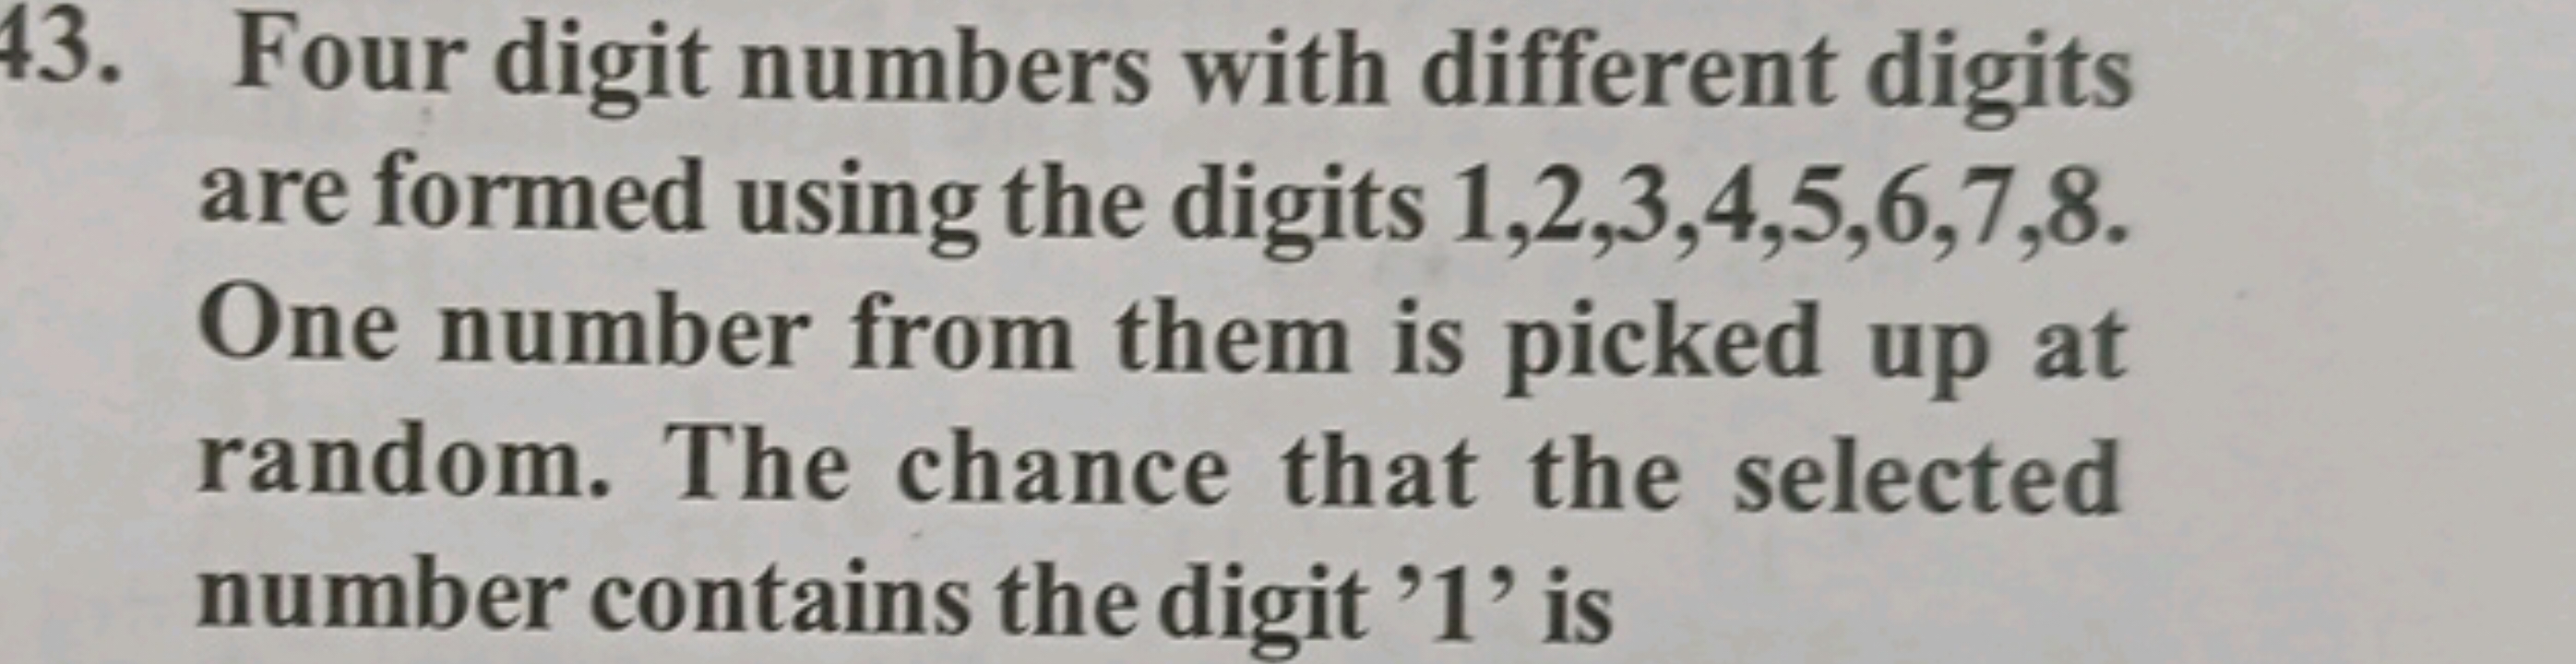 43. Four digit numbers with different digits are formed using the digi